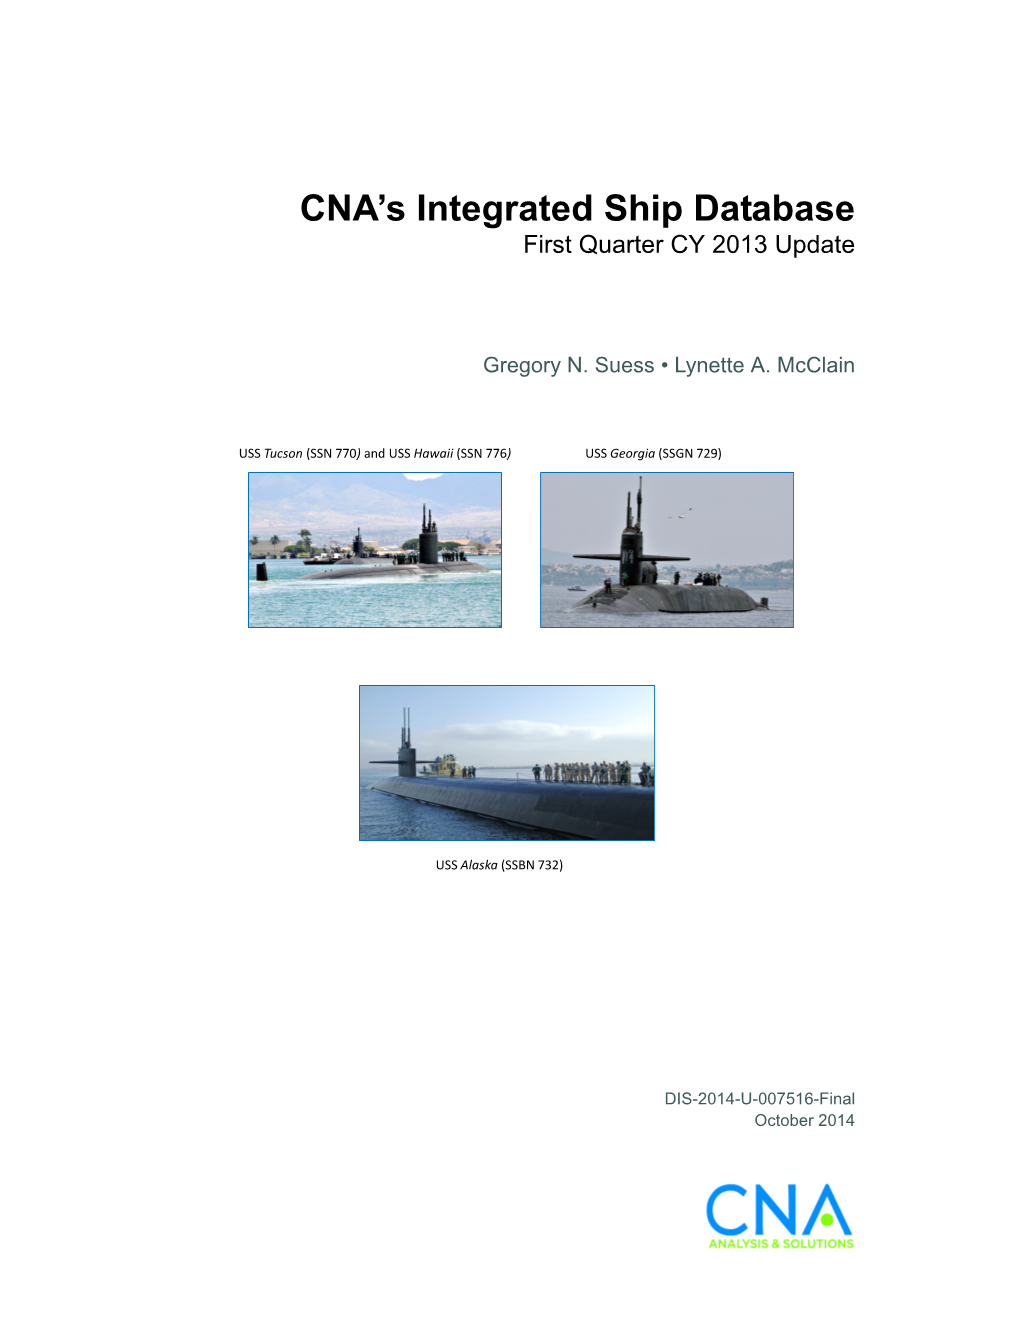 CNA's Integrated Ship Database, First Quarter CY 2013 Update